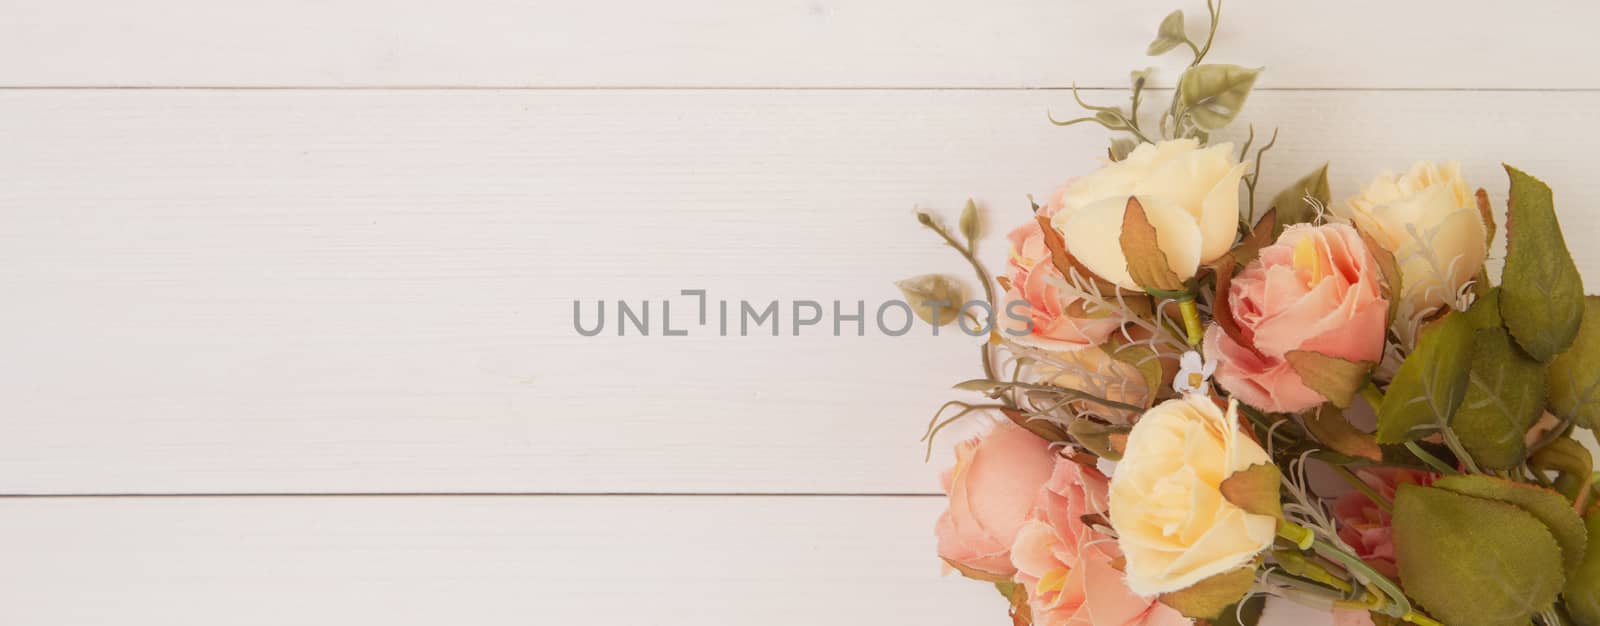 Beautiful flower on wooden background with romantic, mother day or valentine day, spring or summer nature background for decoration, bouquet floral for gift on desk, holiday concept, banner website.